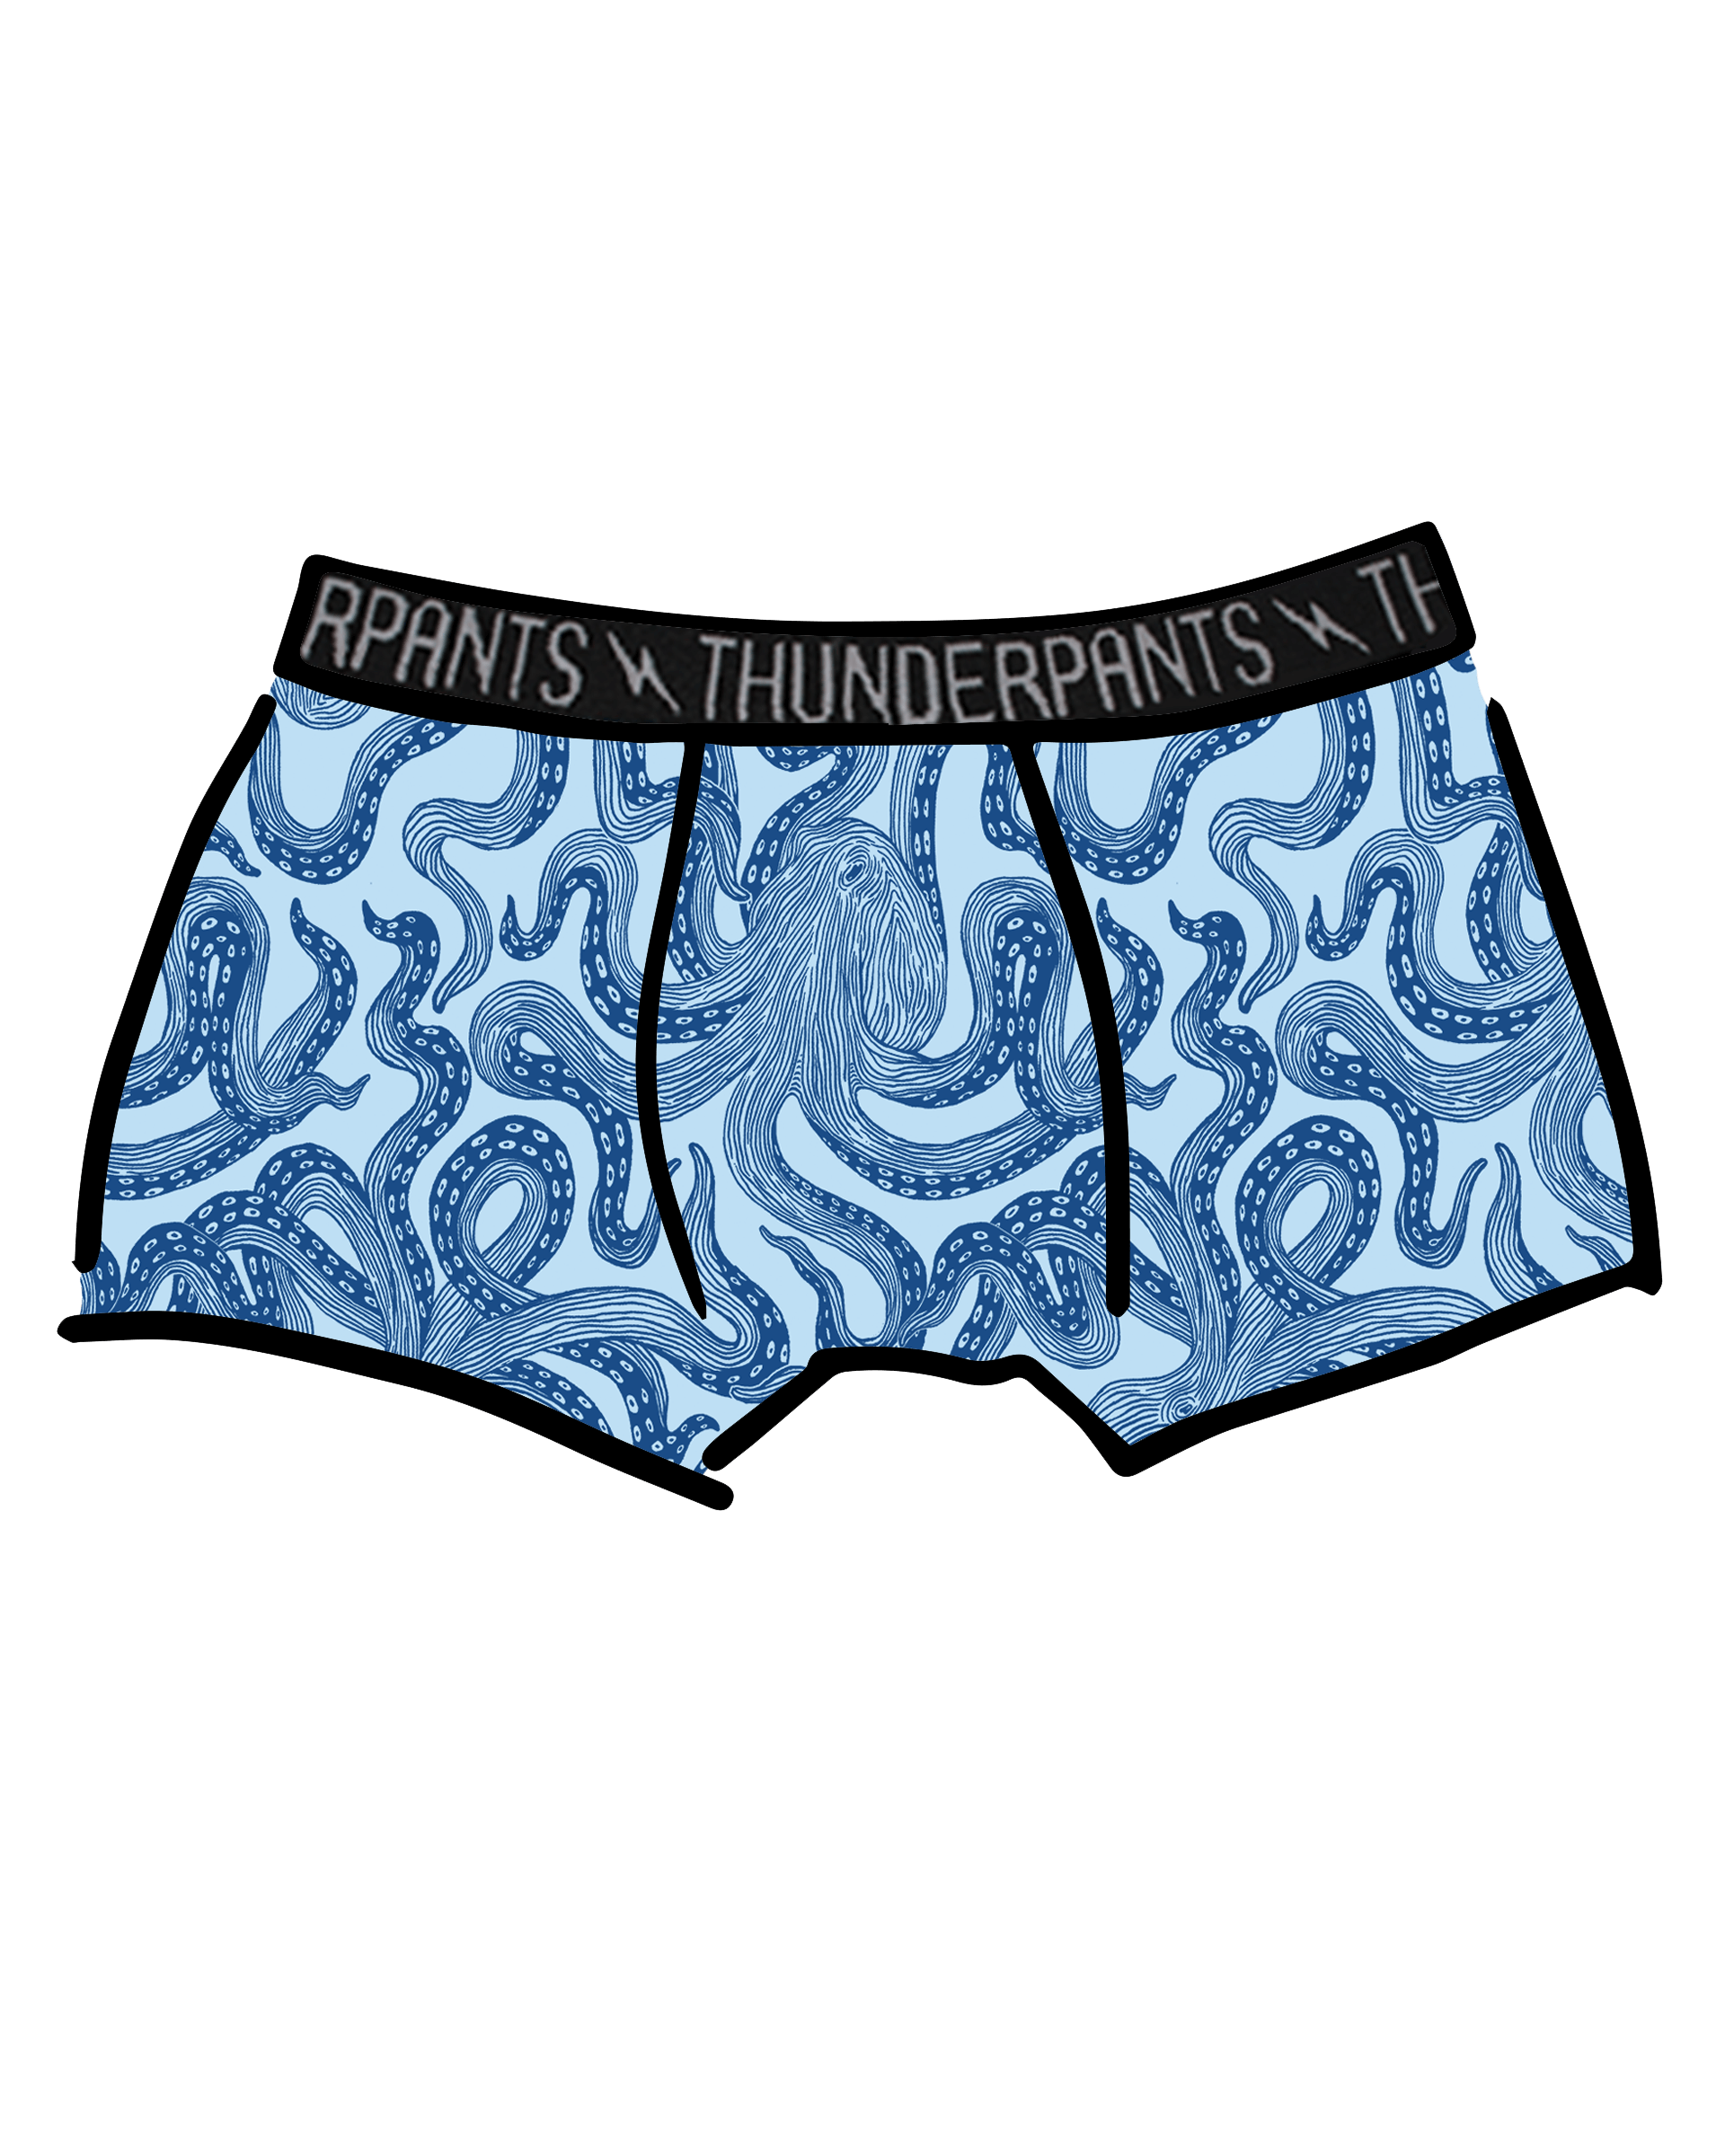 Drawing of Thunderpants Boxer Brief style underwear in Octo-Pants print - dark blue octopus on light blue fabric.